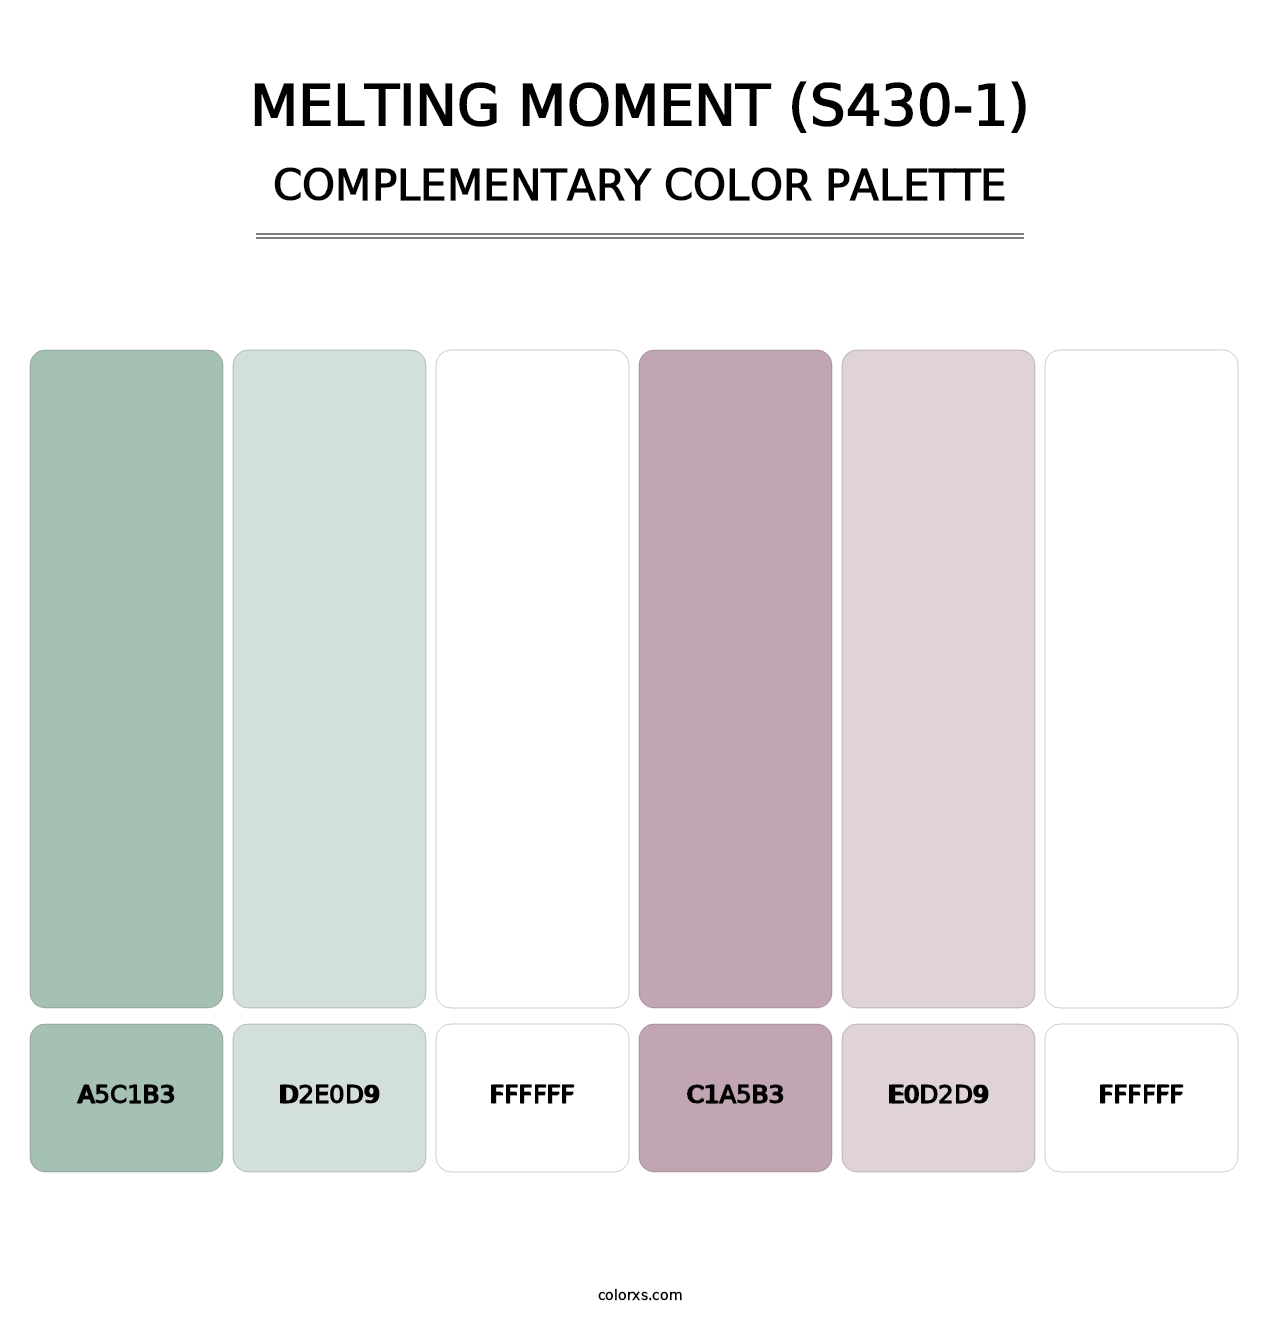 Melting Moment (S430-1) - Complementary Color Palette